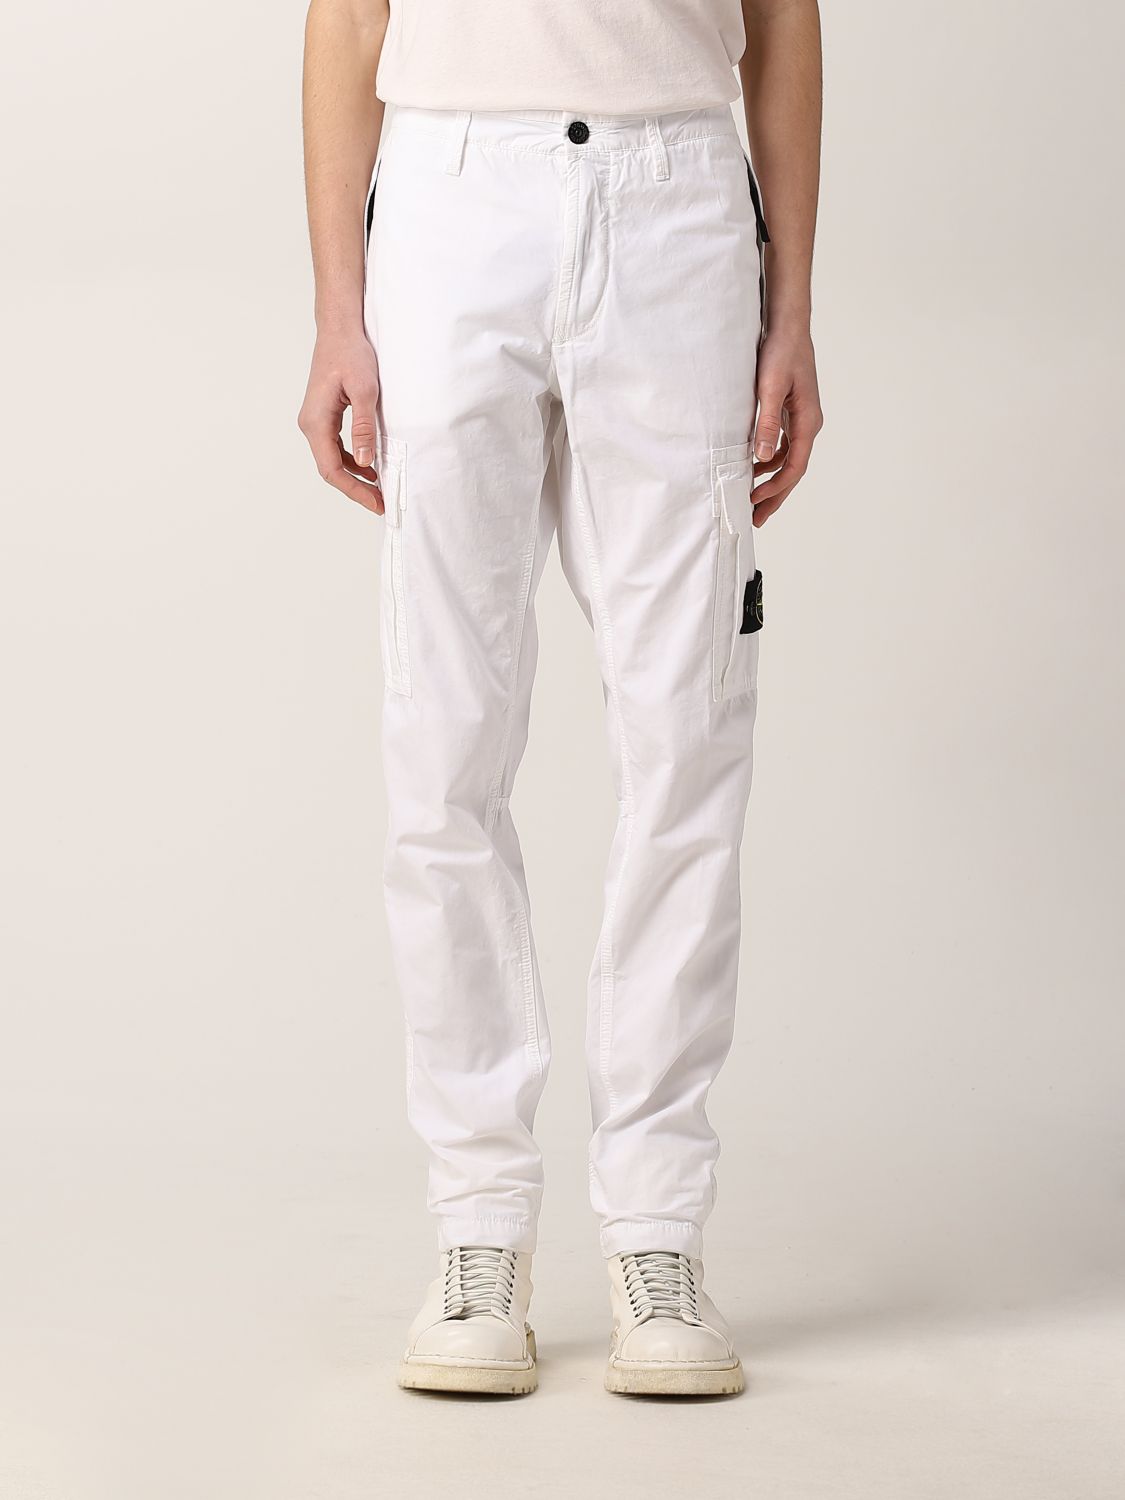 STONE ISLAND: pants in brushed cotton canvas - White Stone Island pants 303WA online on